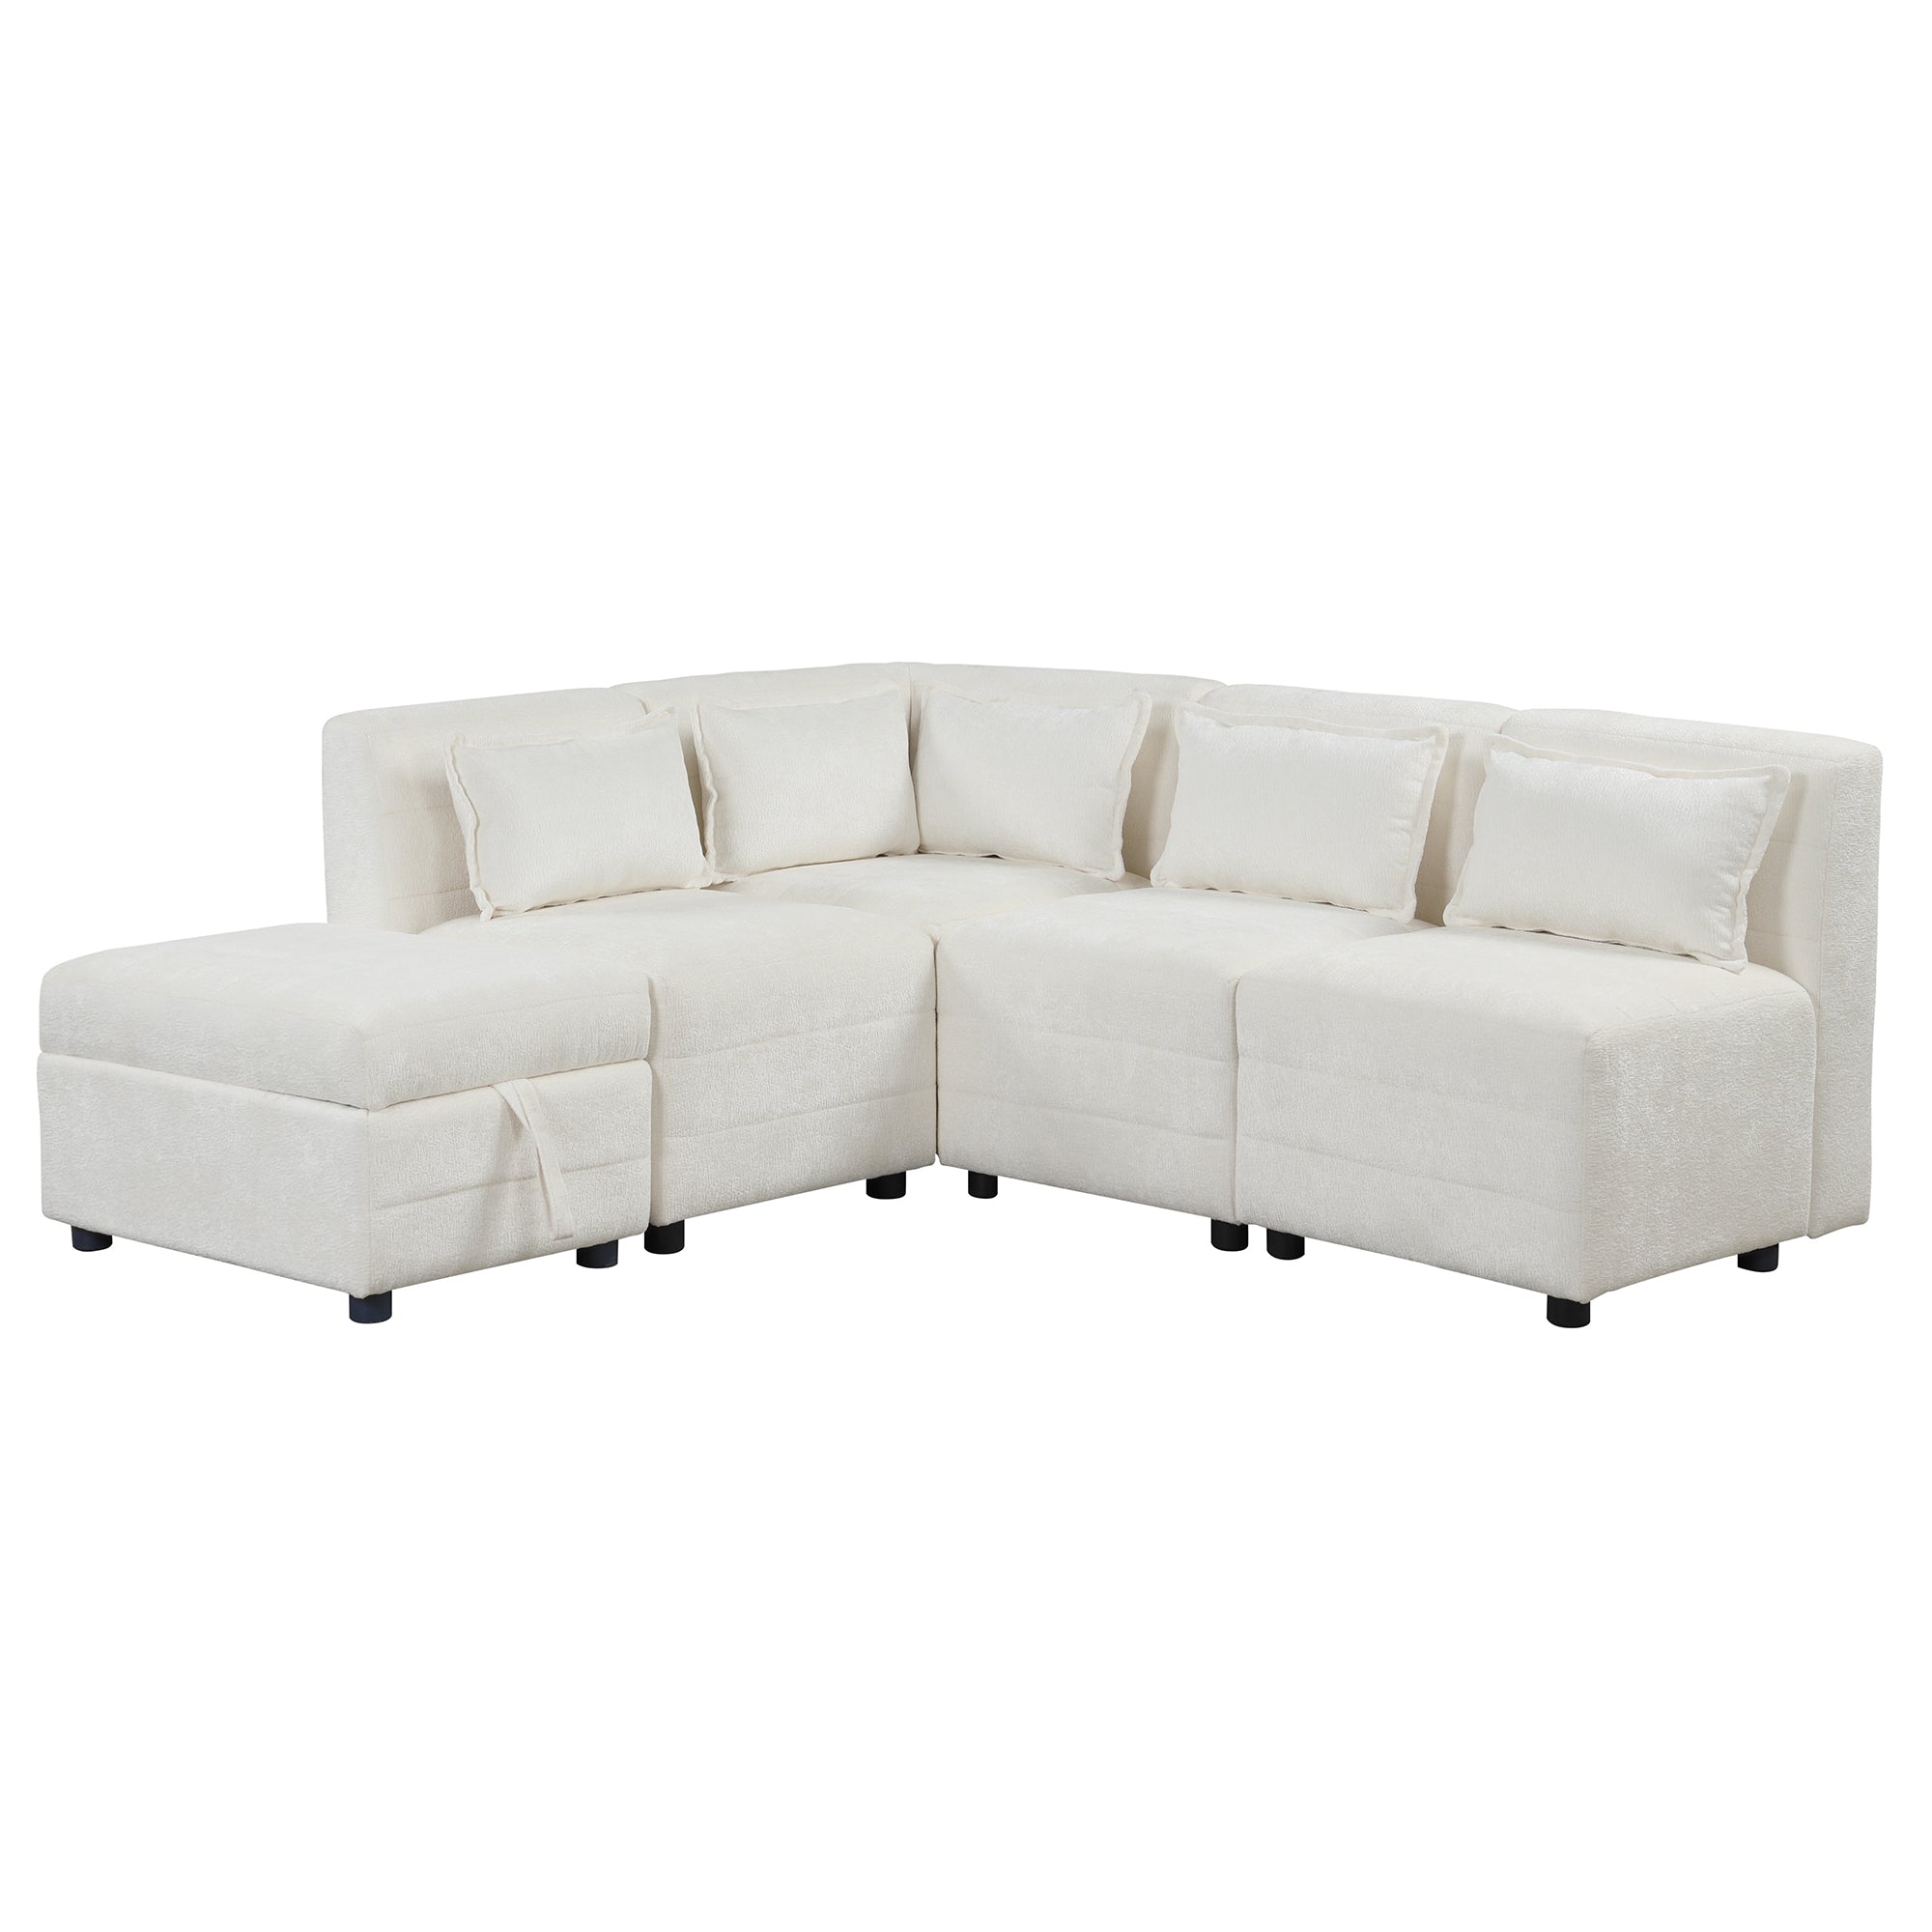 Free-Combined Sectional Sofa 5-seater Modular Couches with Storage - 328c3d43f11a45608d546fd6fa457582